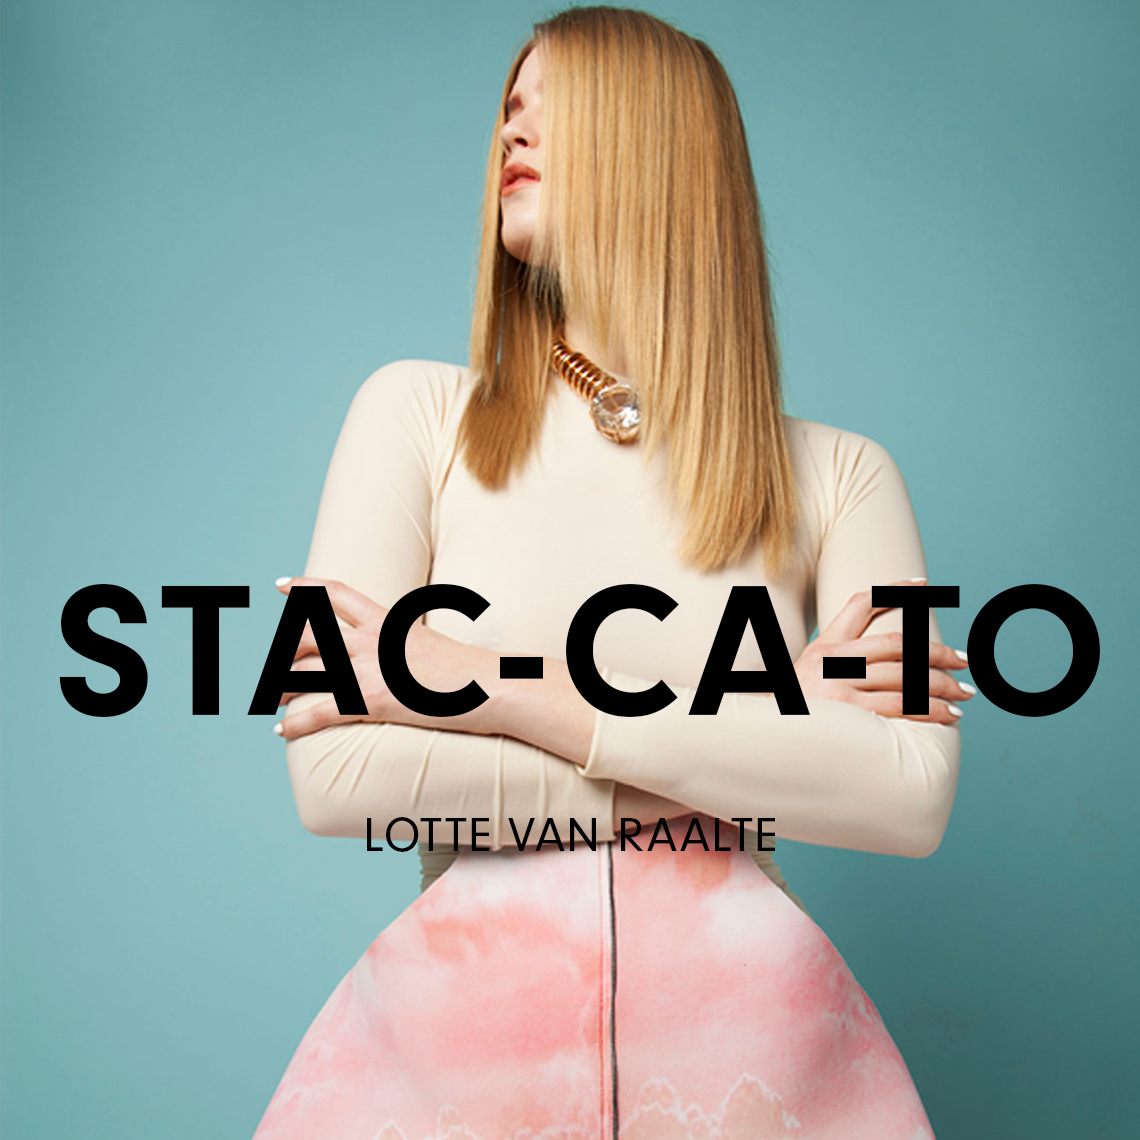 STAC-CA-TO